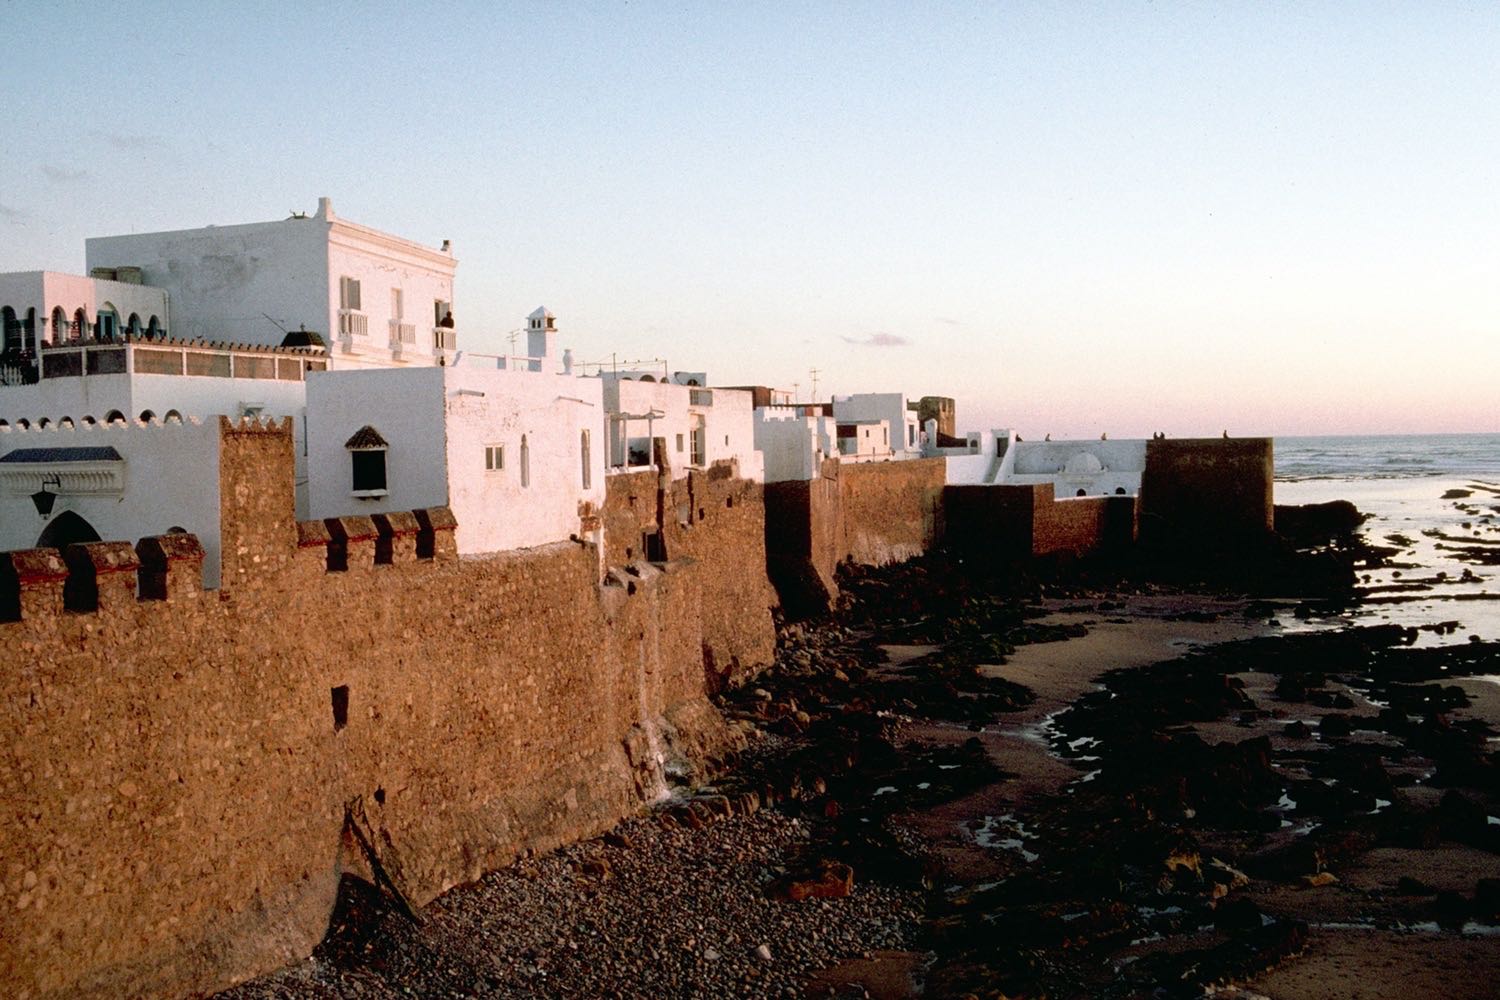 Masonry lookouts punctuate the sea-wall overlooking the Atlantic Ocean